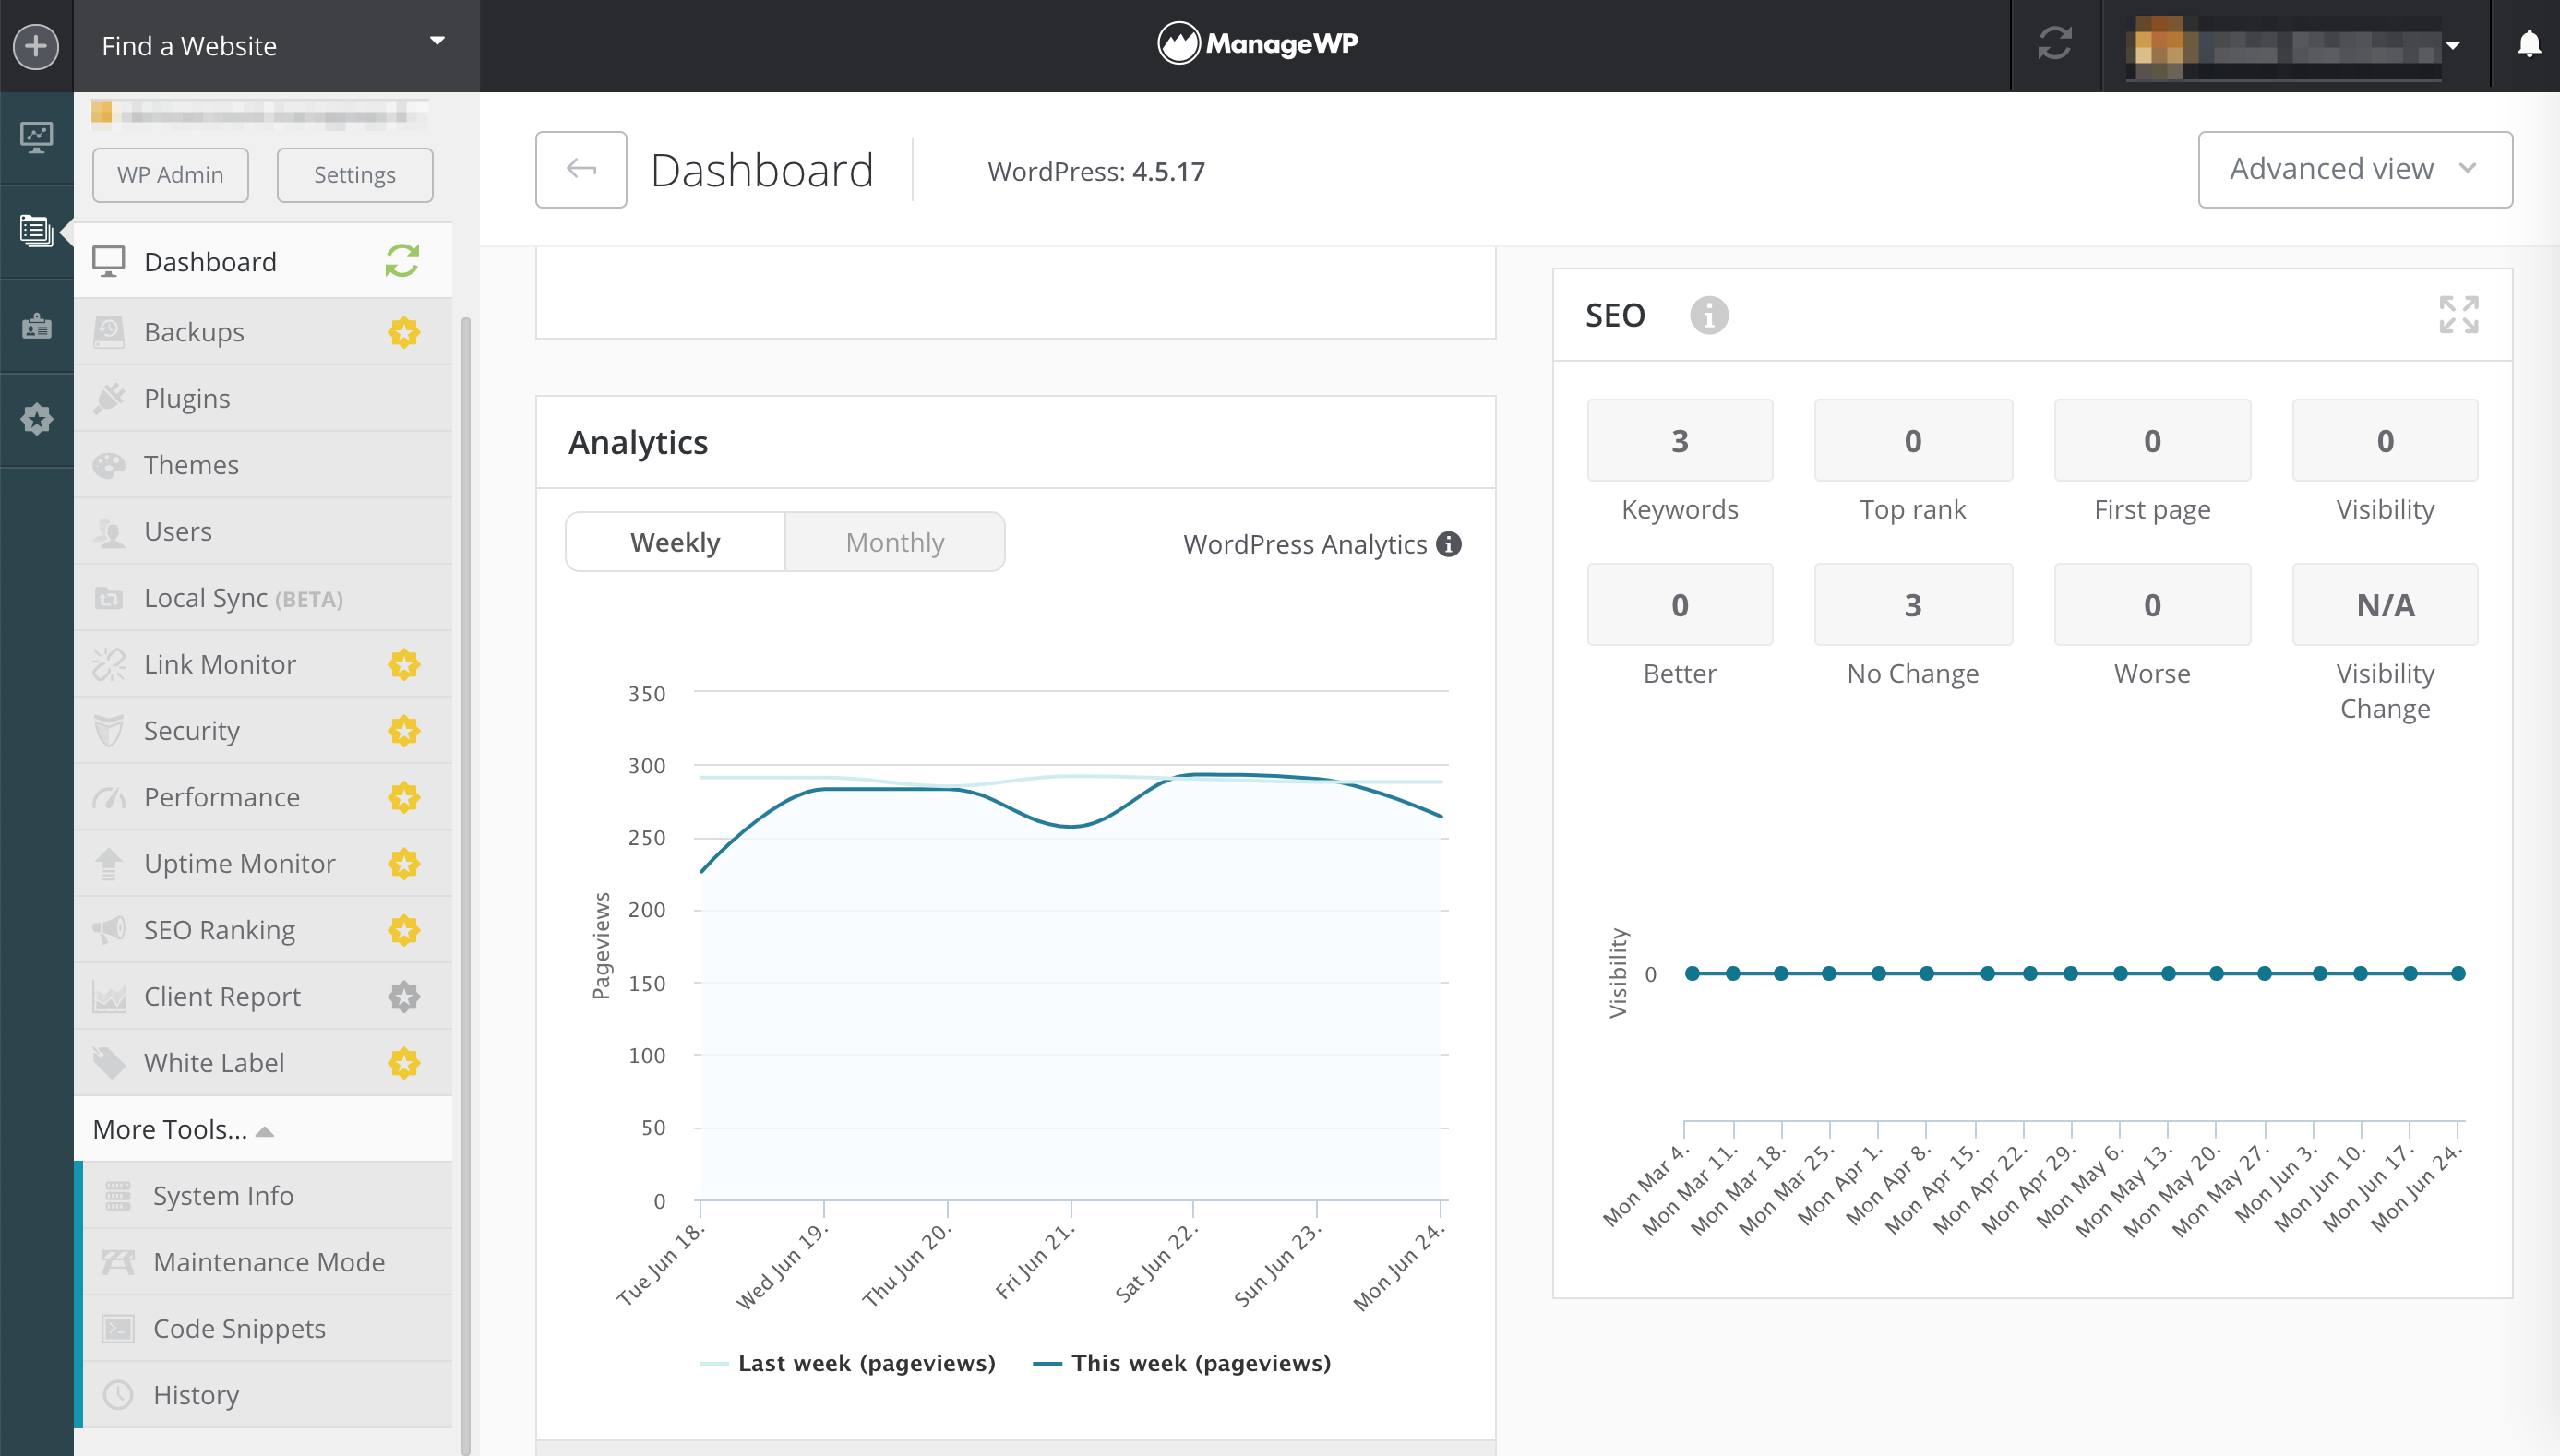 The Analytics and SEO widgets in the ManageWP dashboard.